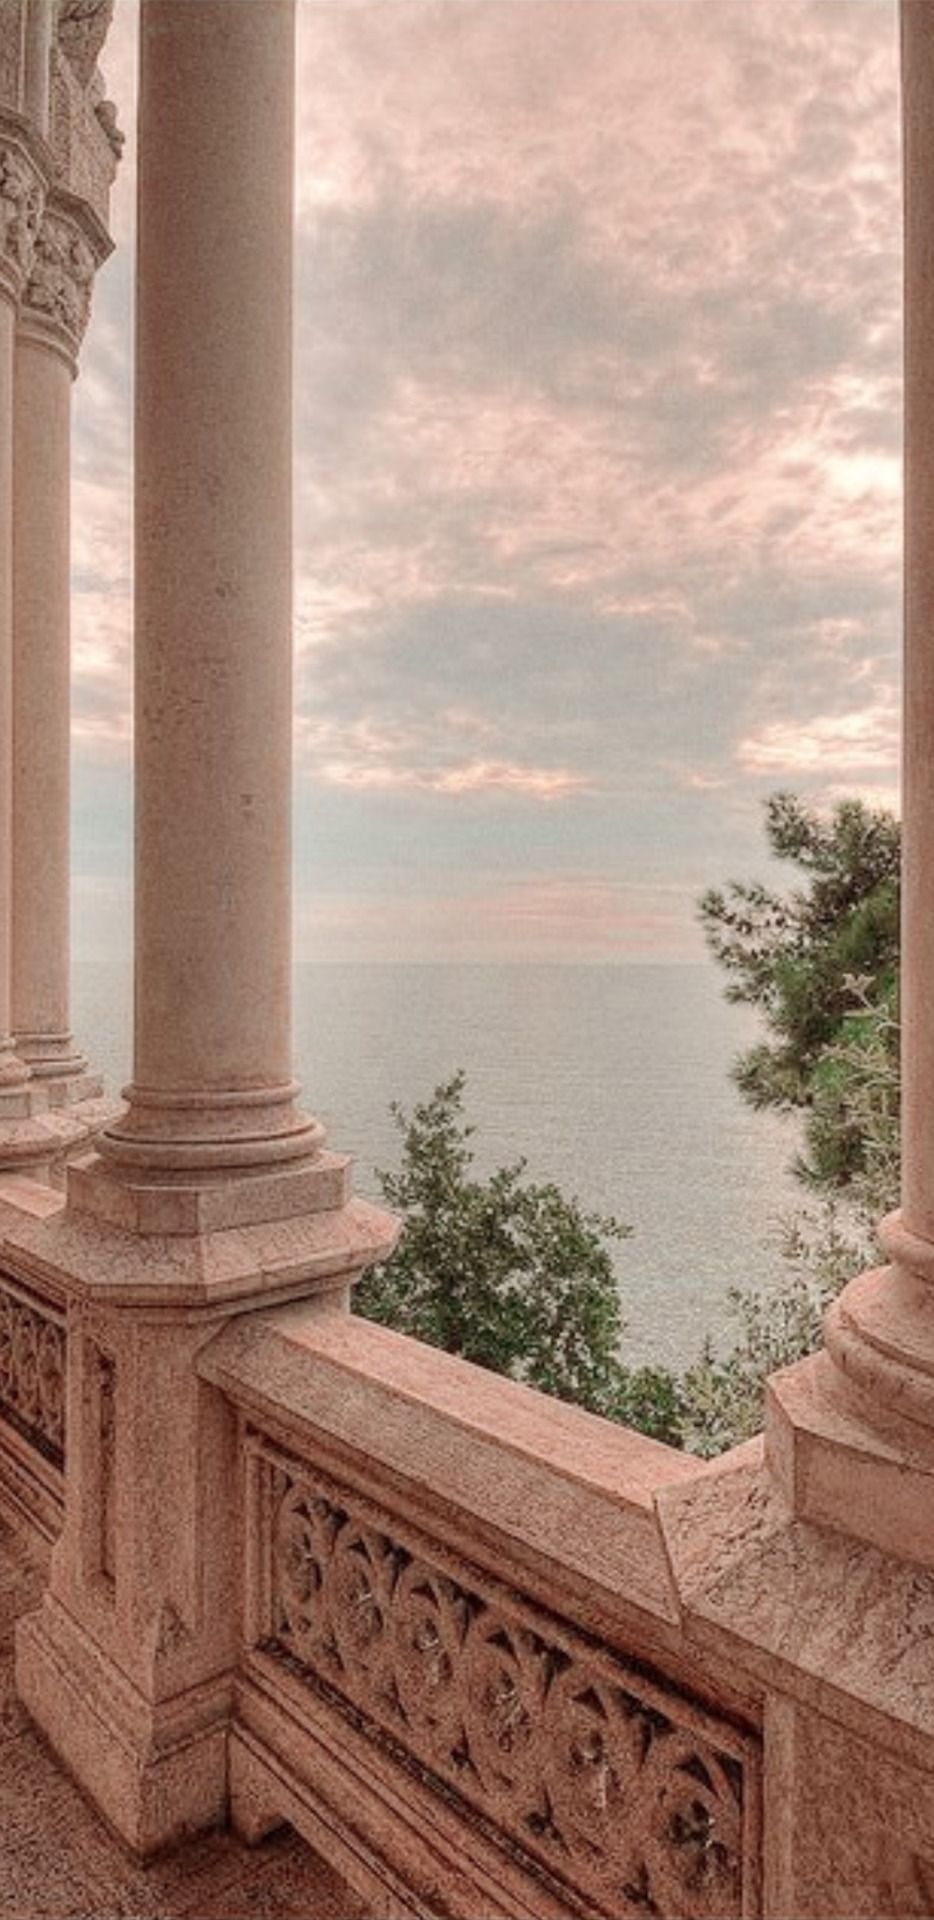 A balcony with columns and a view of the sea - Light academia